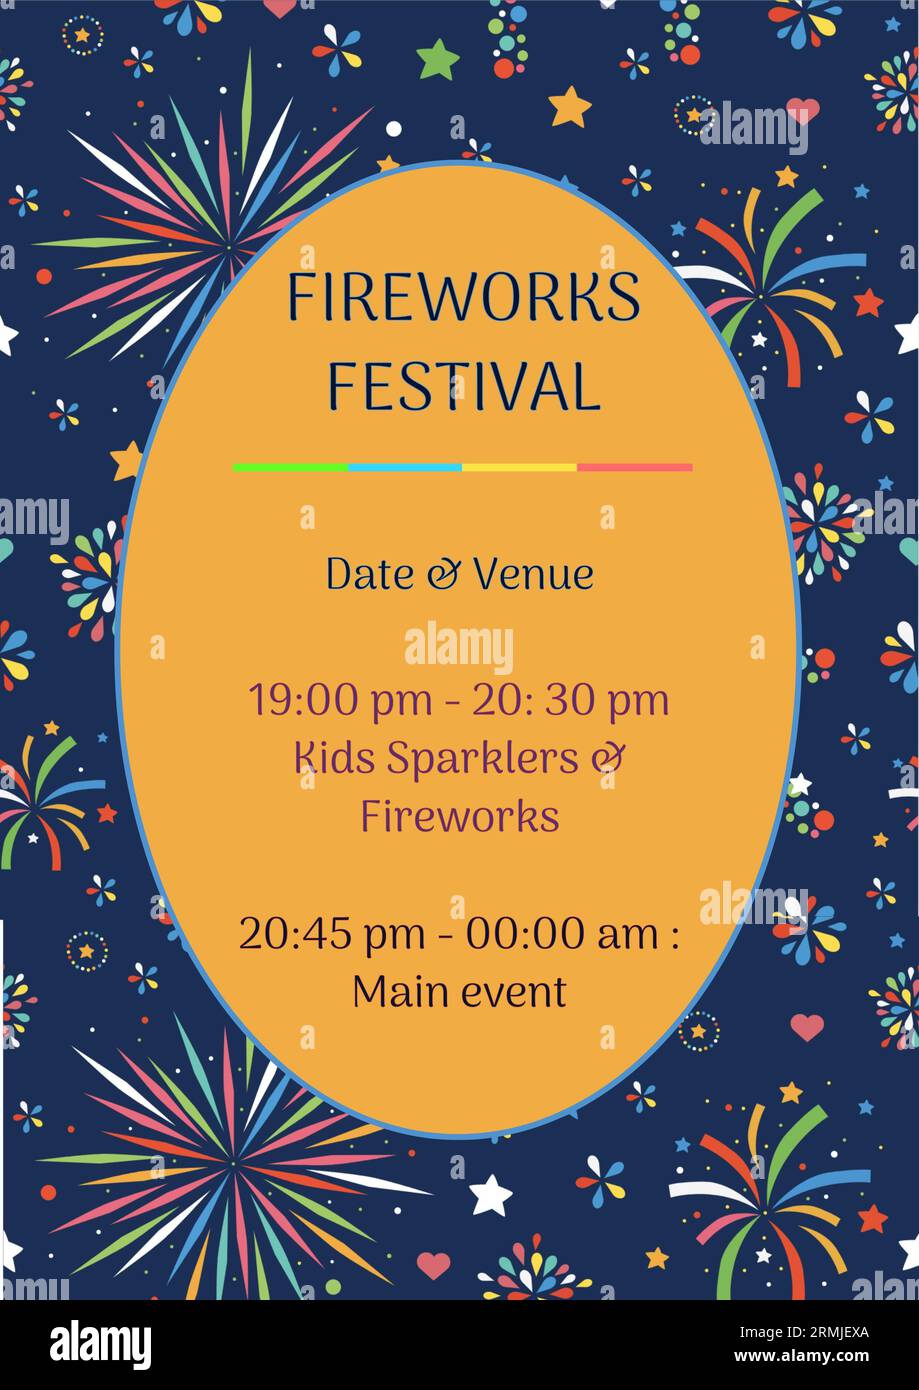 Illustration of fireworks festival, date, venue, timings, kids sparklers and fireworks, main event Stock Photo